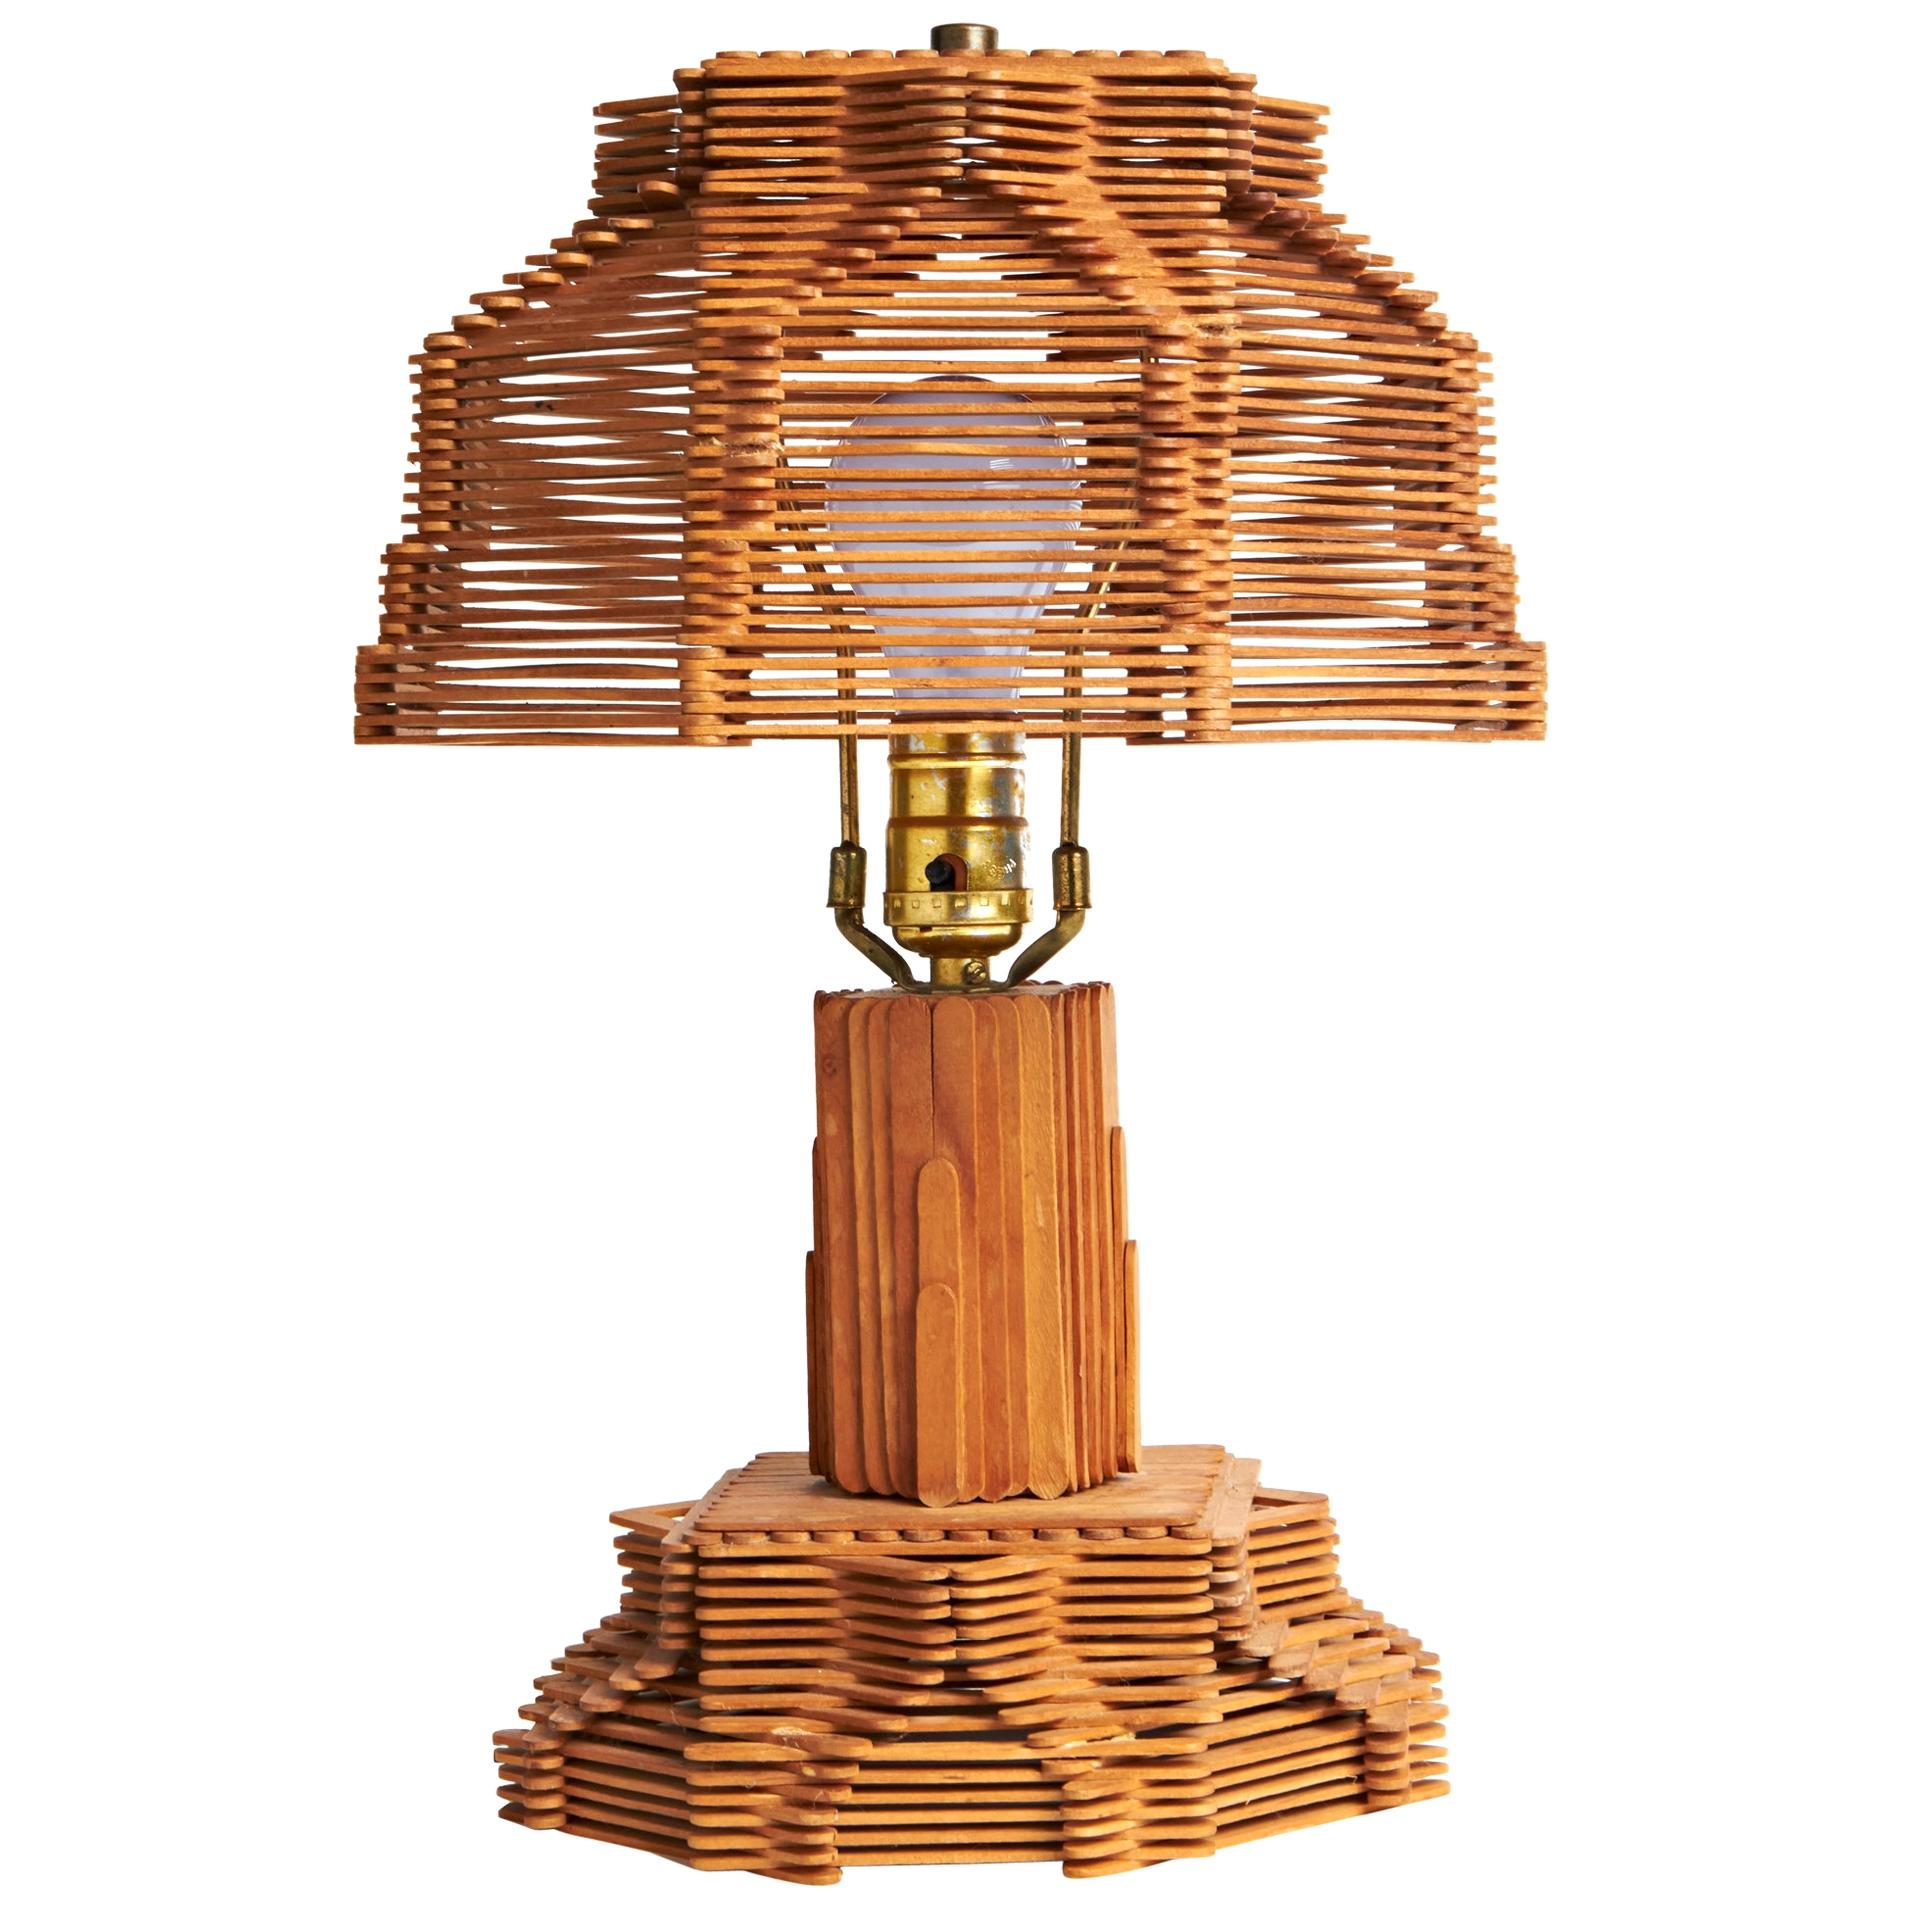 American Late Art Deco Outsider Art Architectural Popsicle Stick Table Lamp